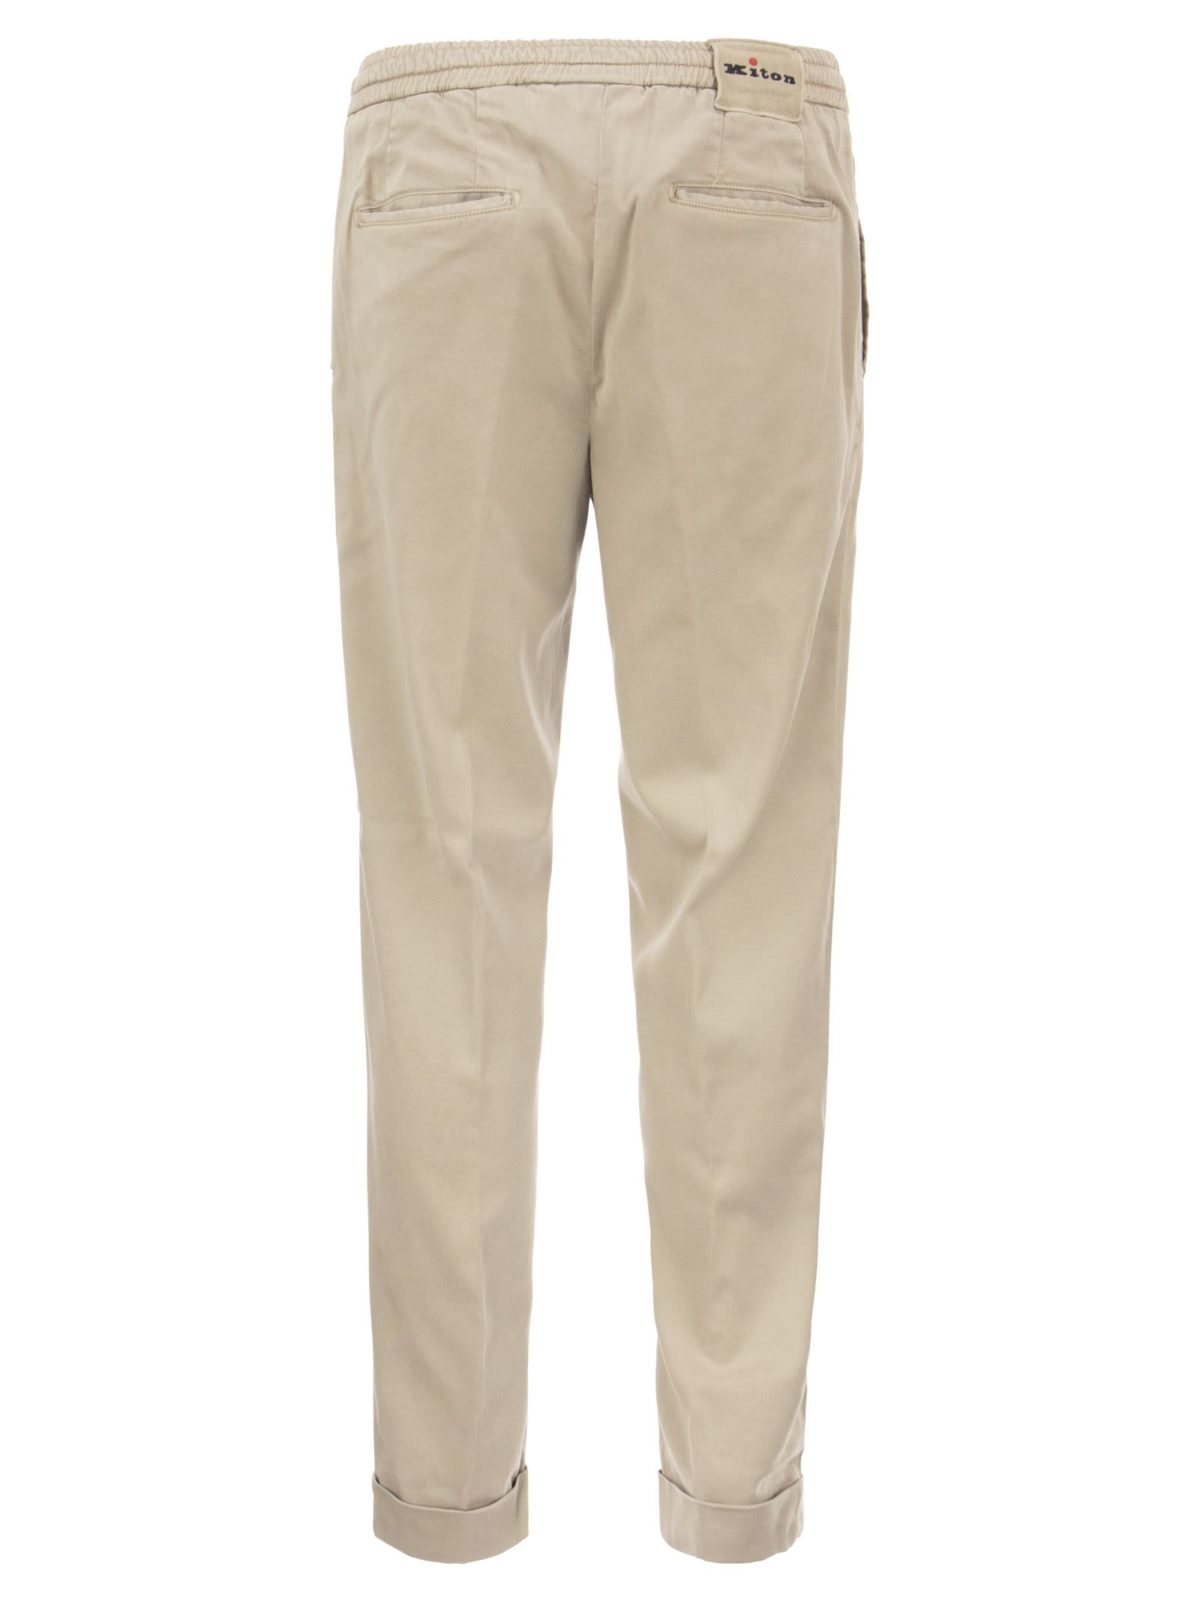 Trousers with darts - Bellettini.com